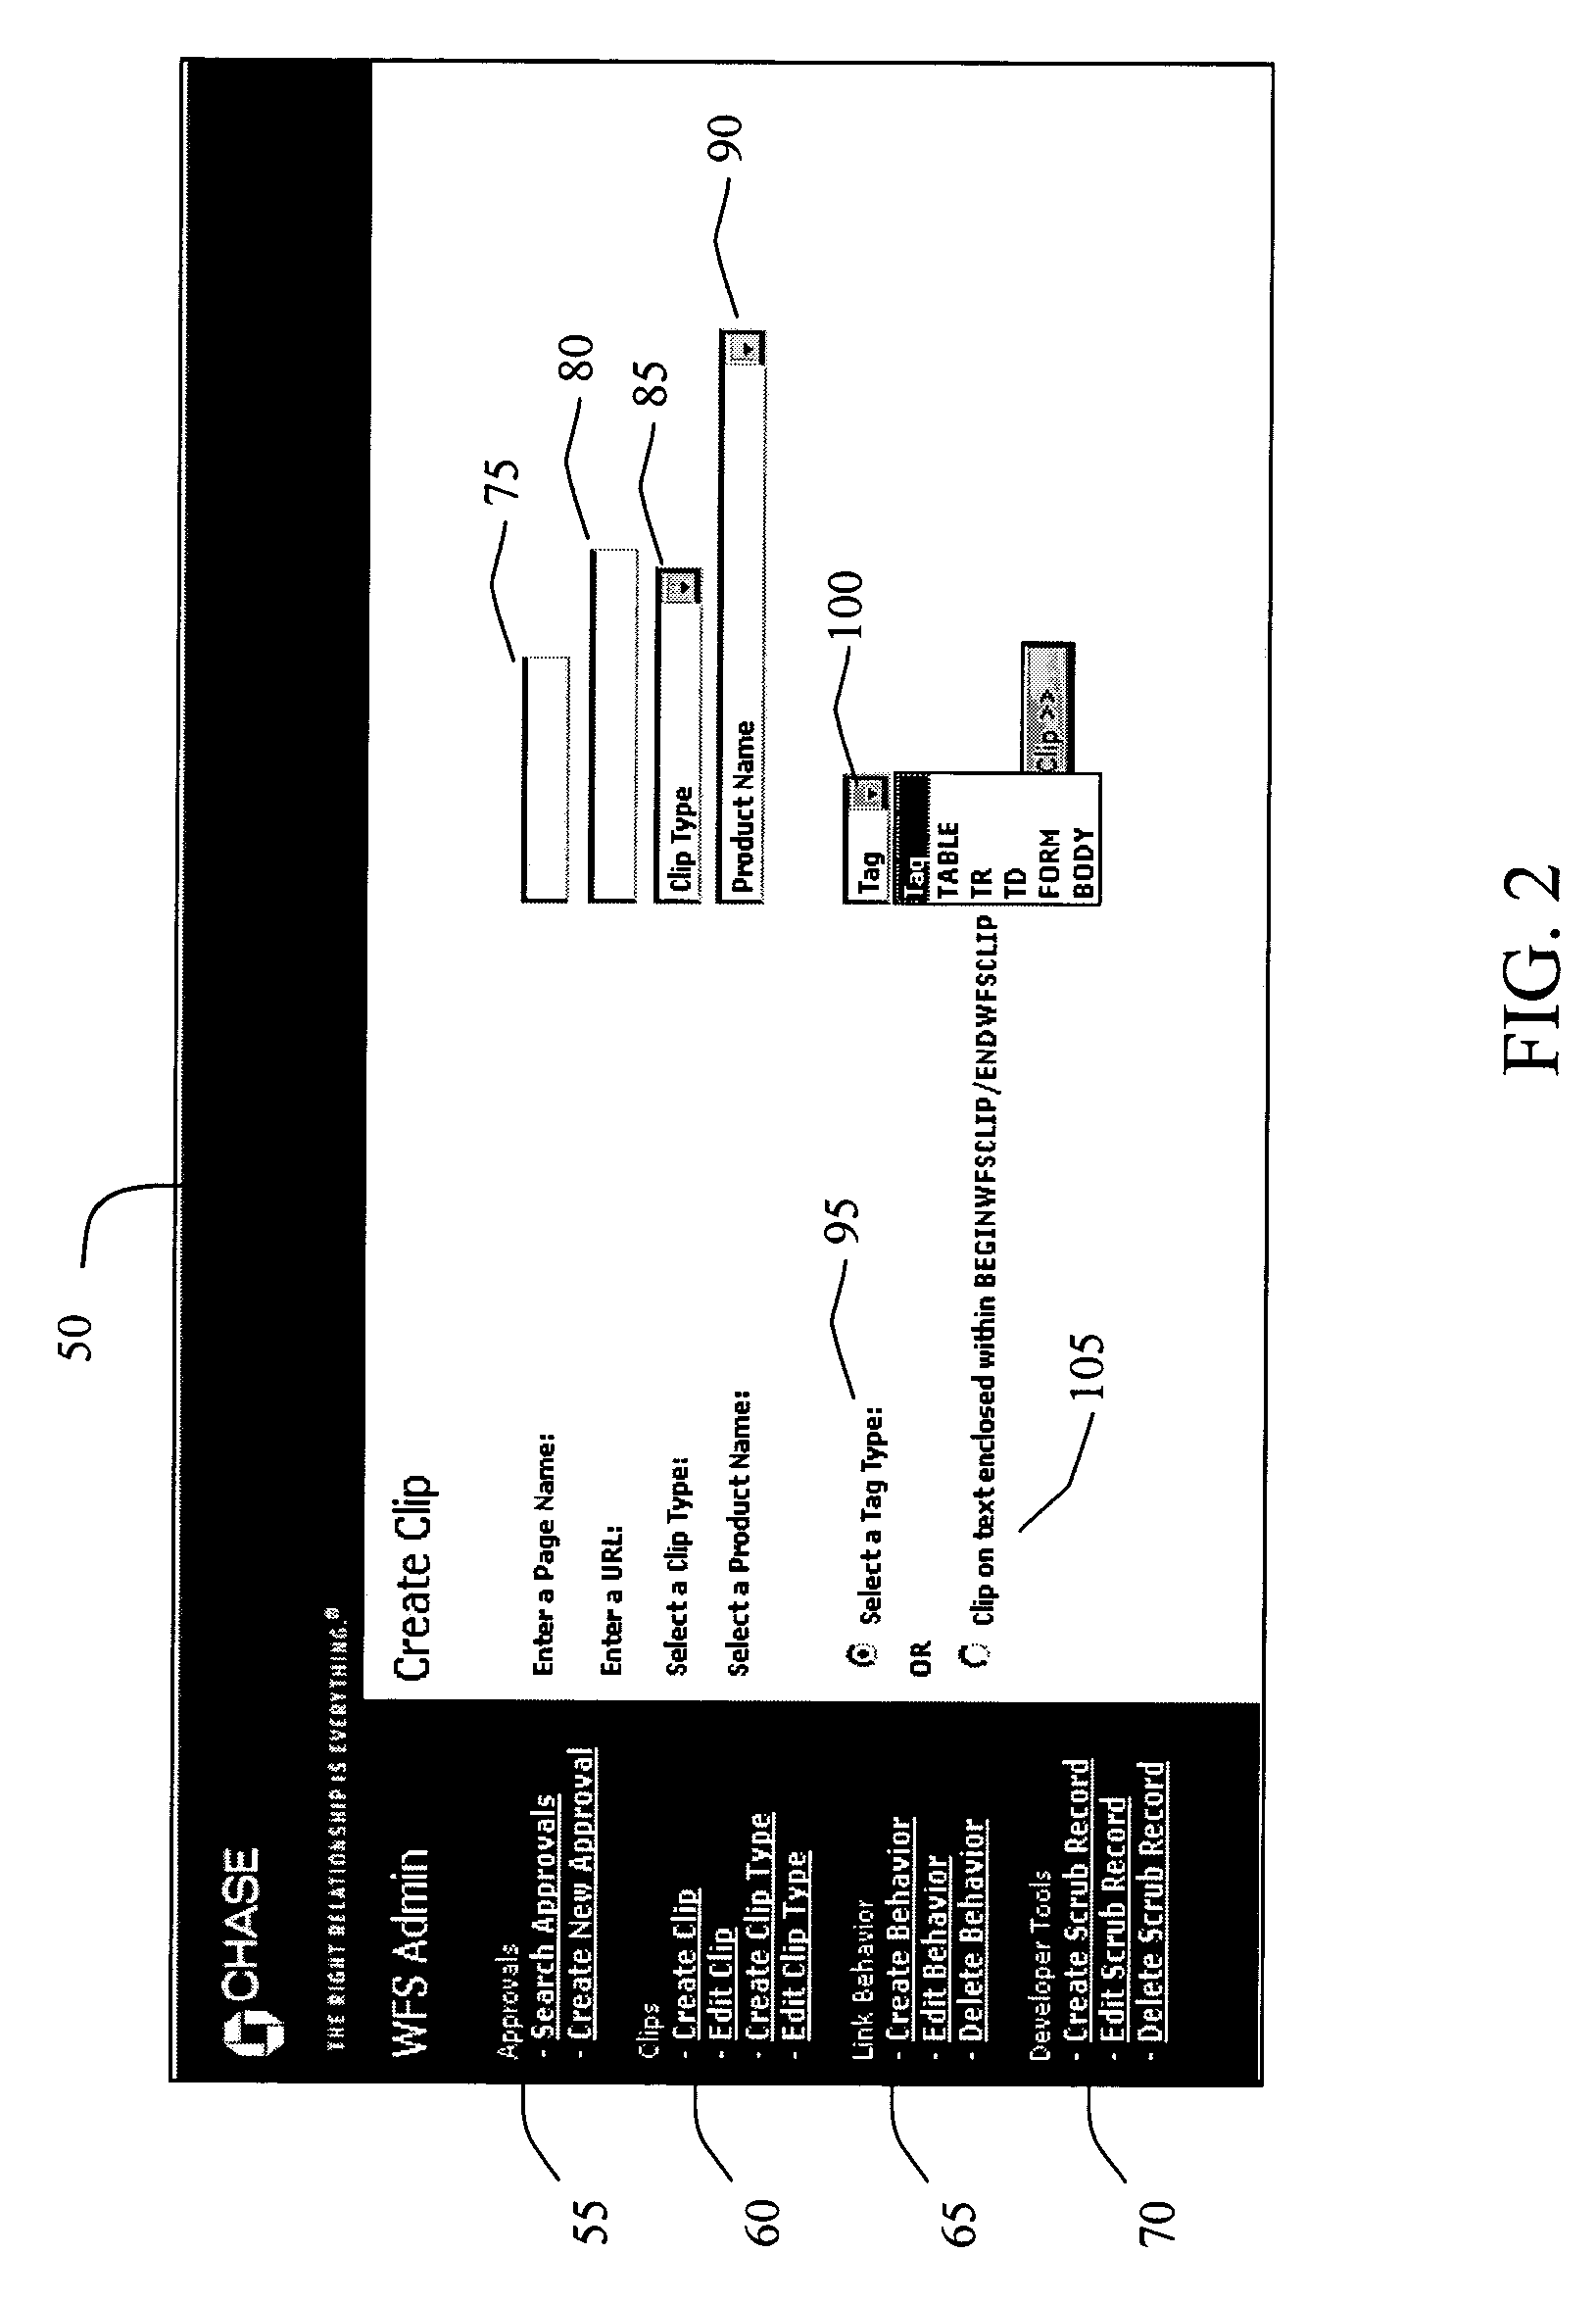 System and method for customizing a portal environment